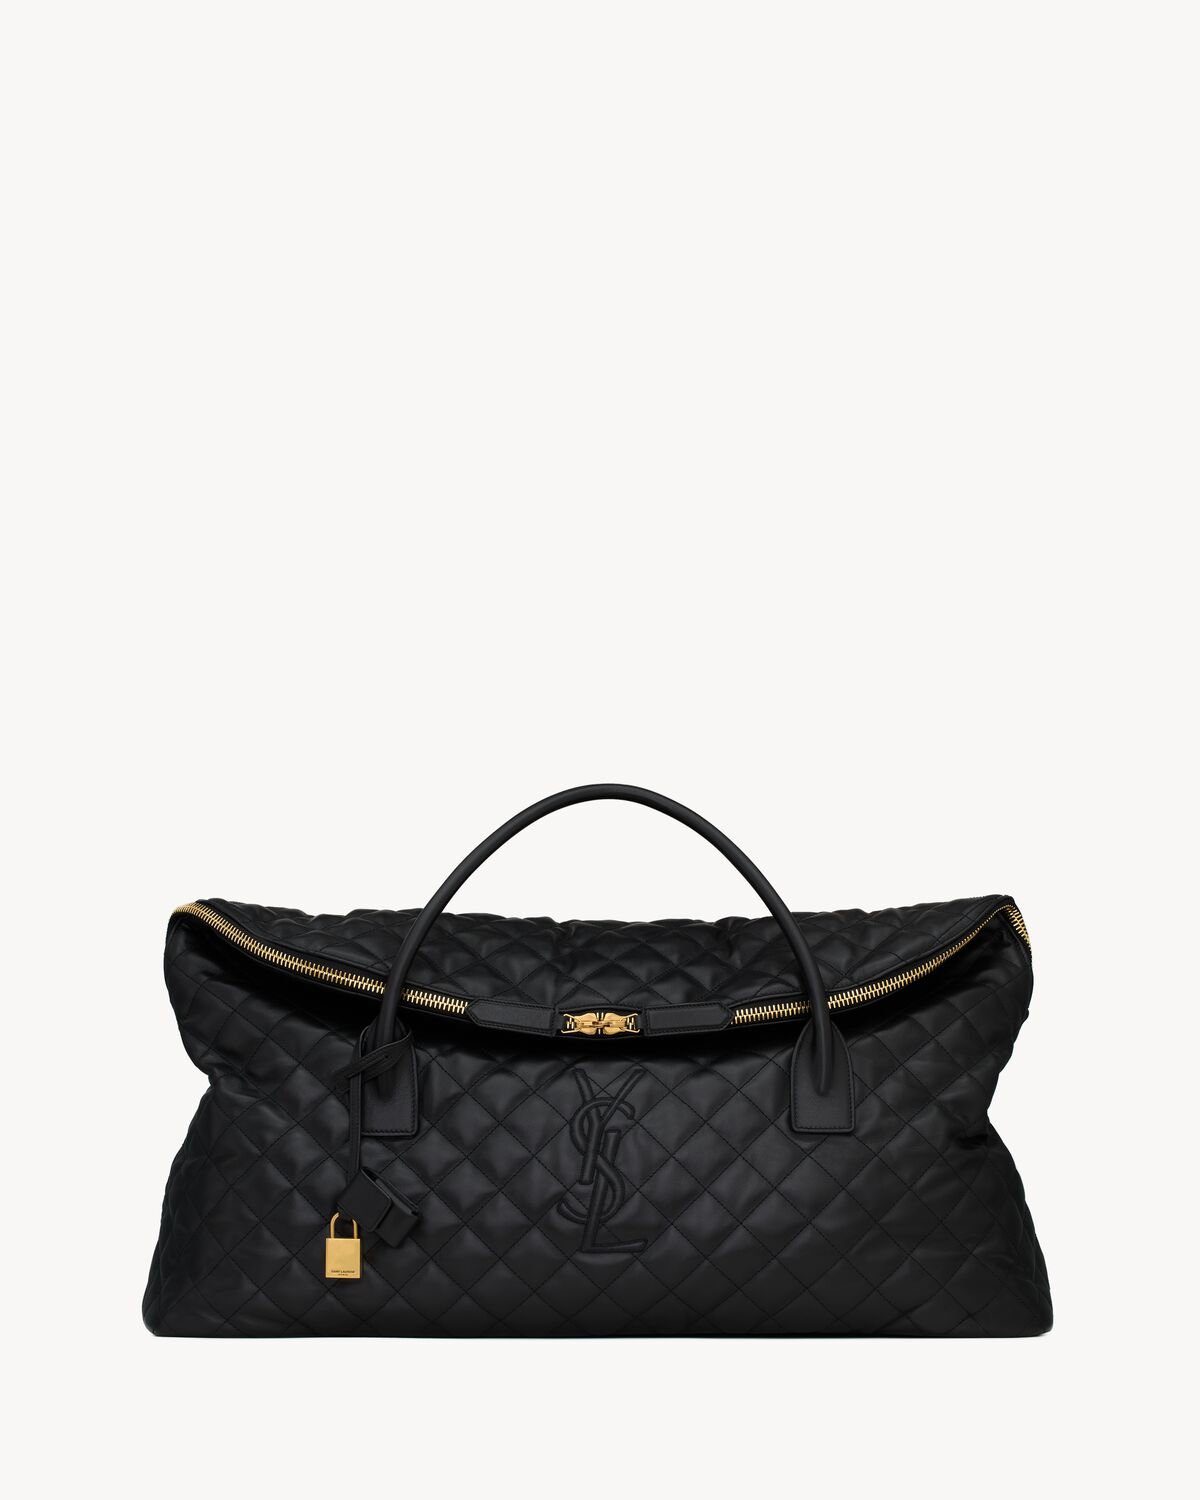 ES GIANT TRAVEL BAG IN QUILTED LEATHER